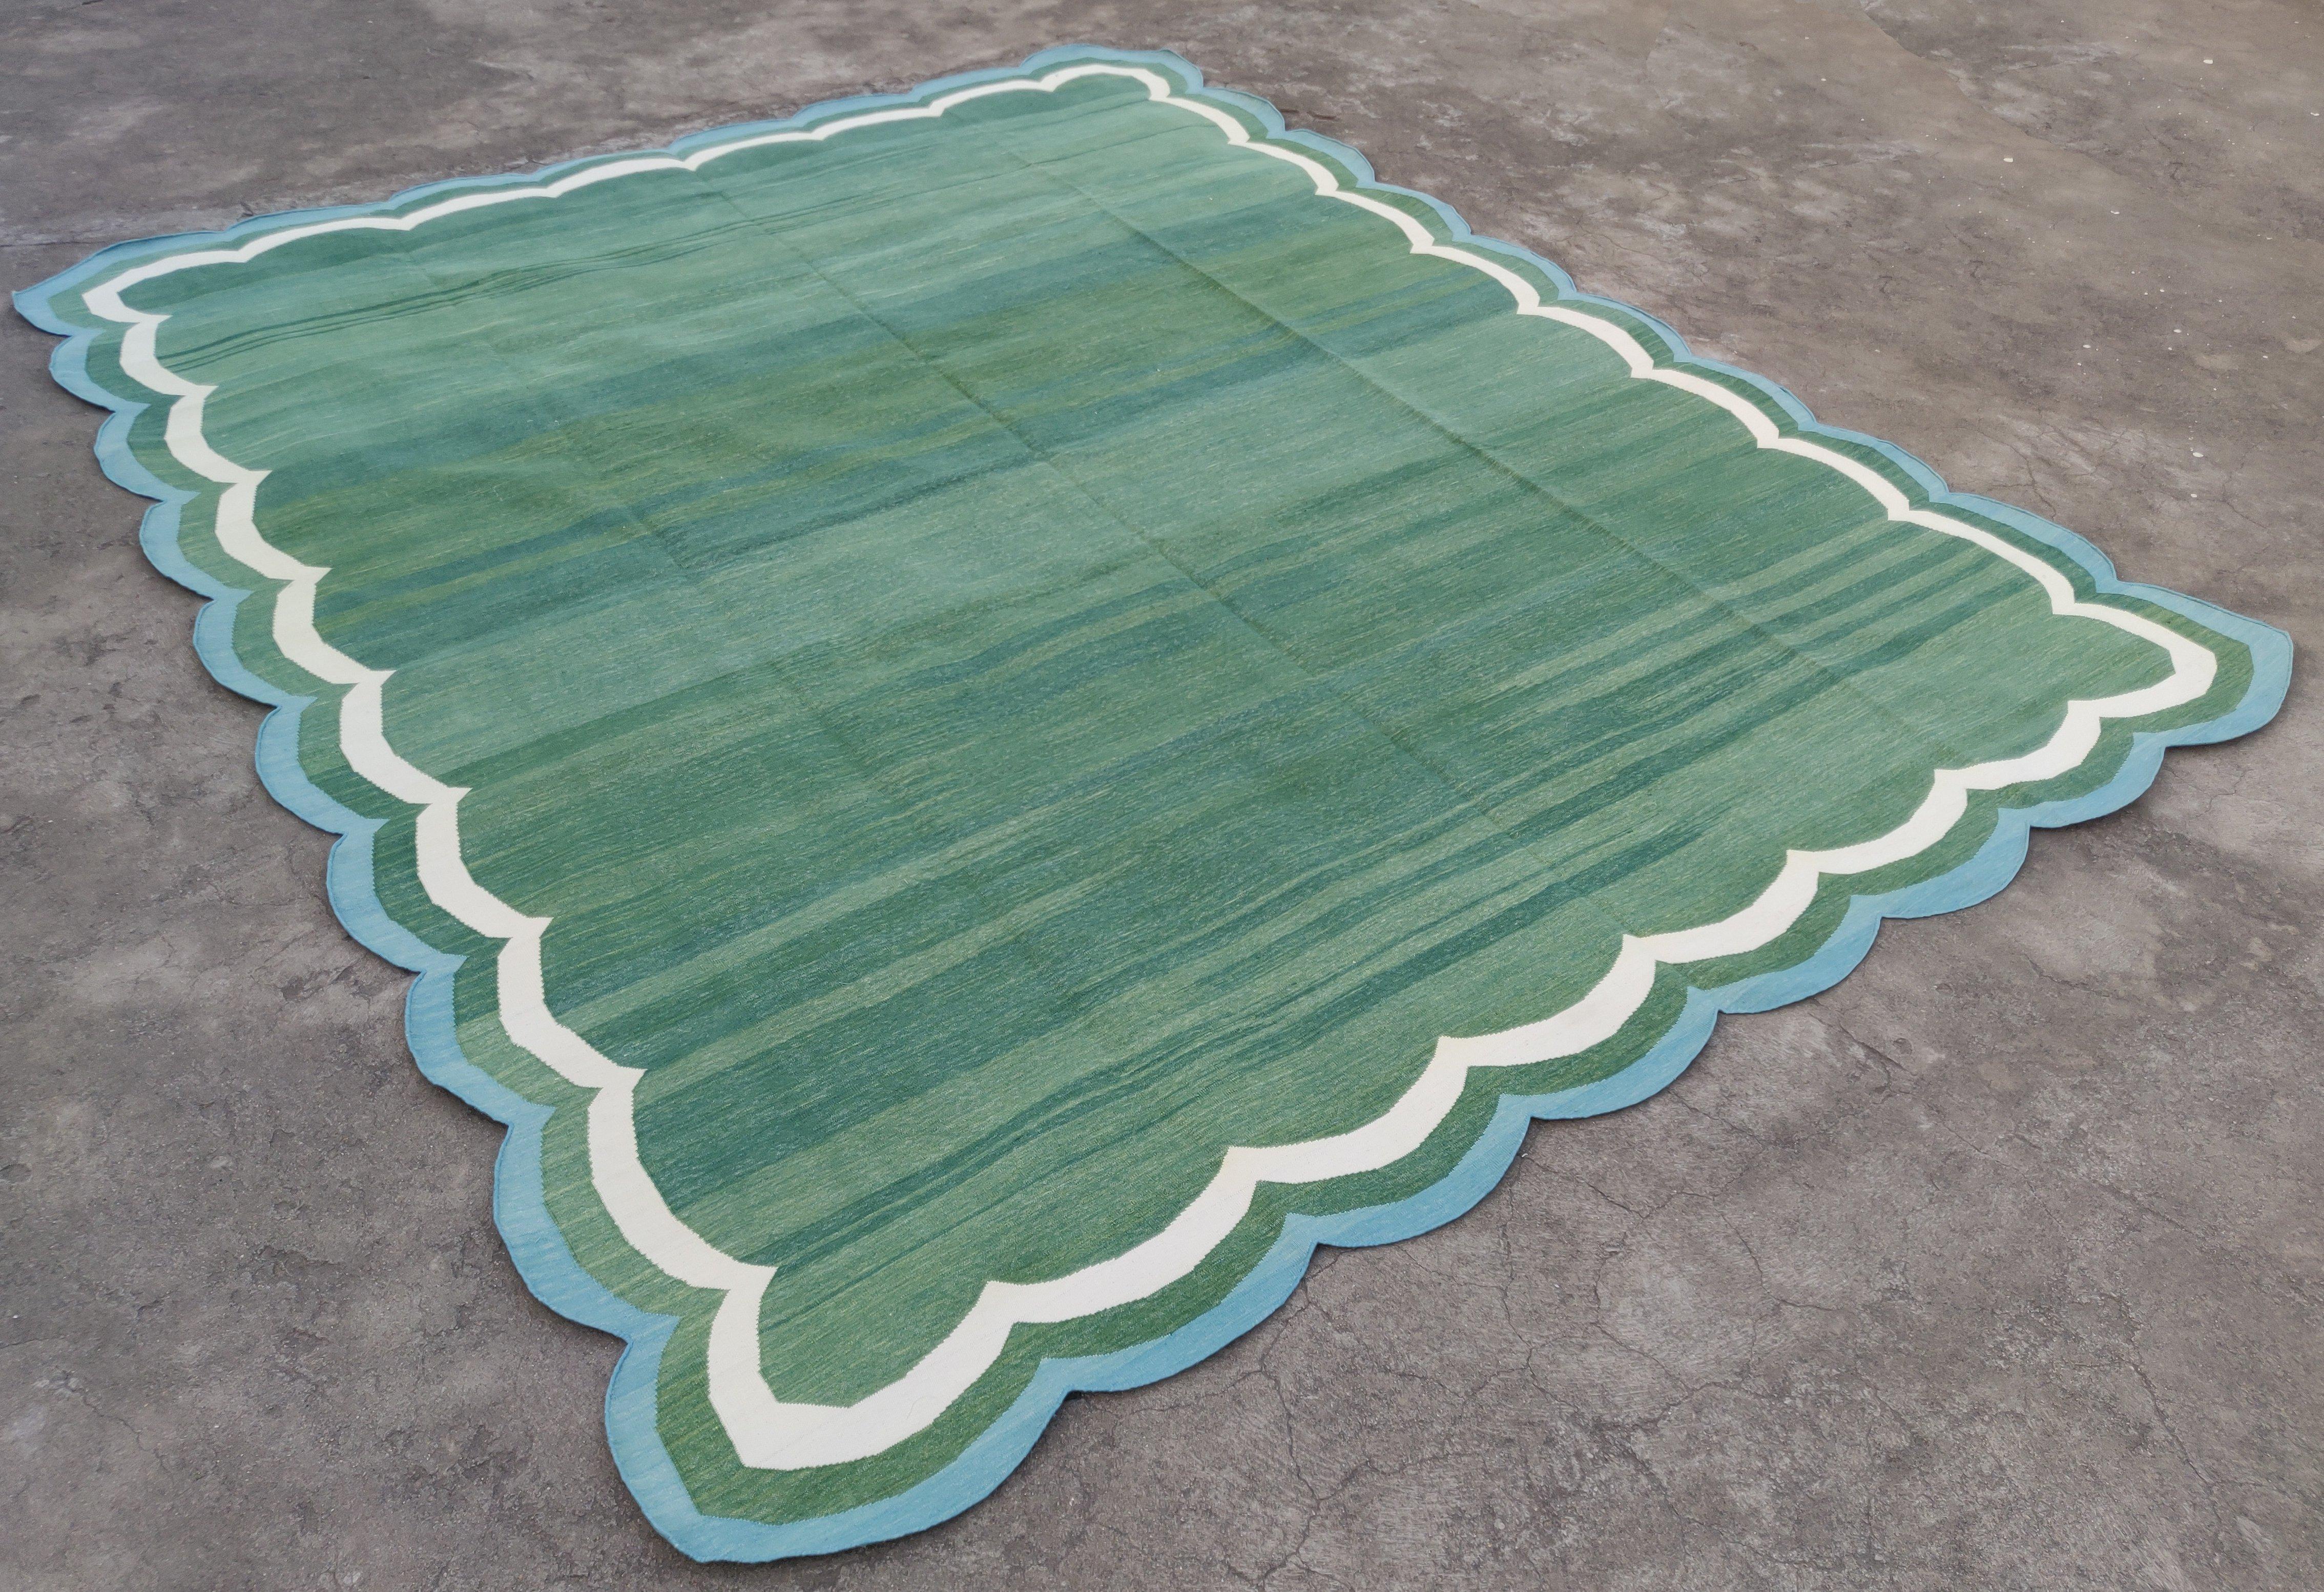 Cotton Vegetable Dyed Forest Green, Cream And Blue Scalloped Rug-8'x10'
(Scallops runs all four sides)
These special flat-weave dhurries are hand-woven with 15 ply 100% cotton yarn. Due to the special manufacturing techniques used to create our